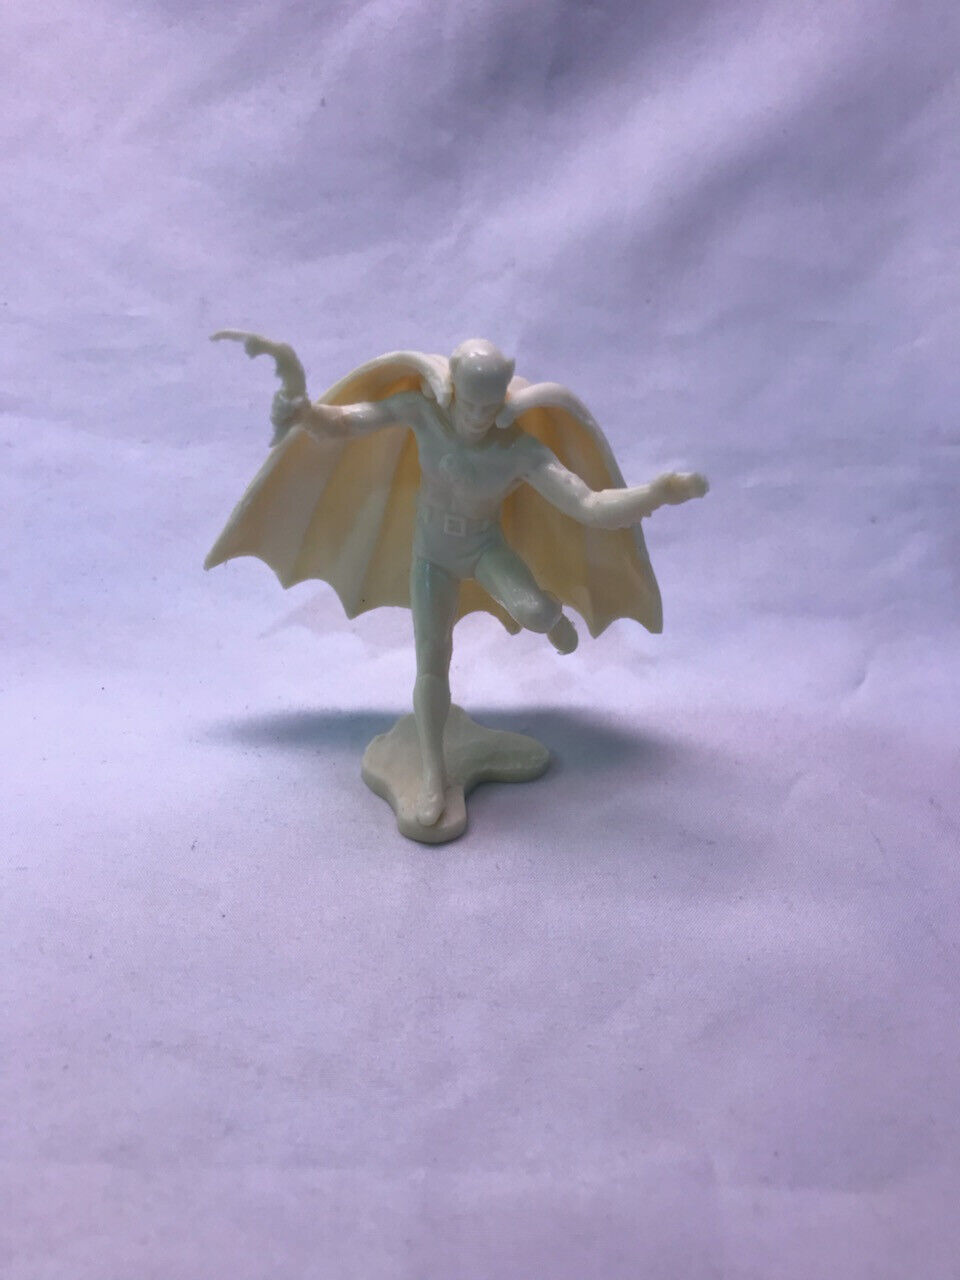 REPRODUCTION IDEAL Batman From the 1966 Justice League Play Set